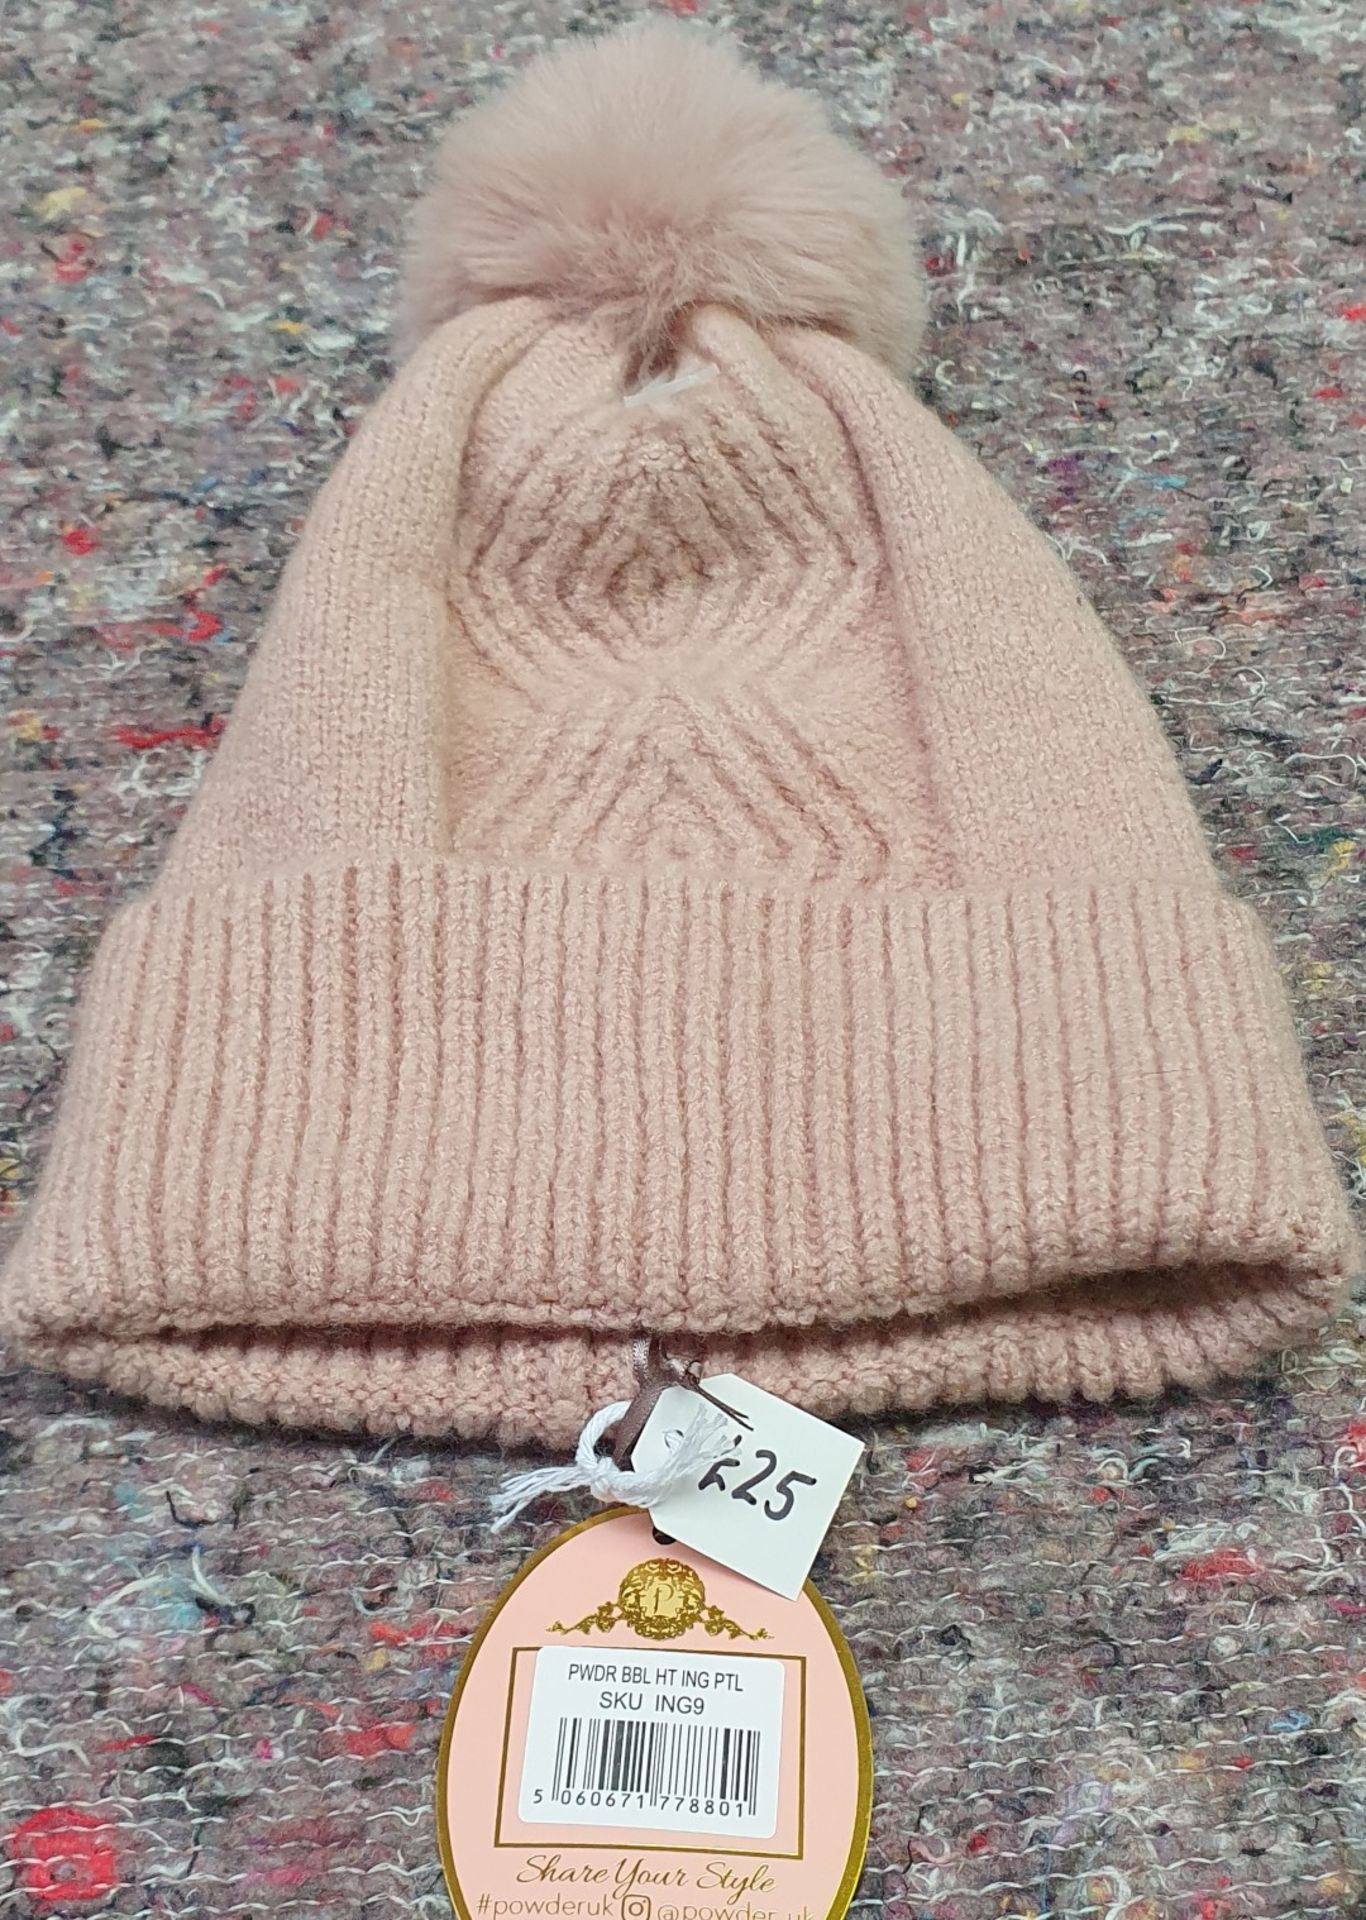 13 x Assorted Bobble Hats and Woolly Gloves by From The Source - New Stock - Ref: TCH236 - CL840 - - Image 5 of 24